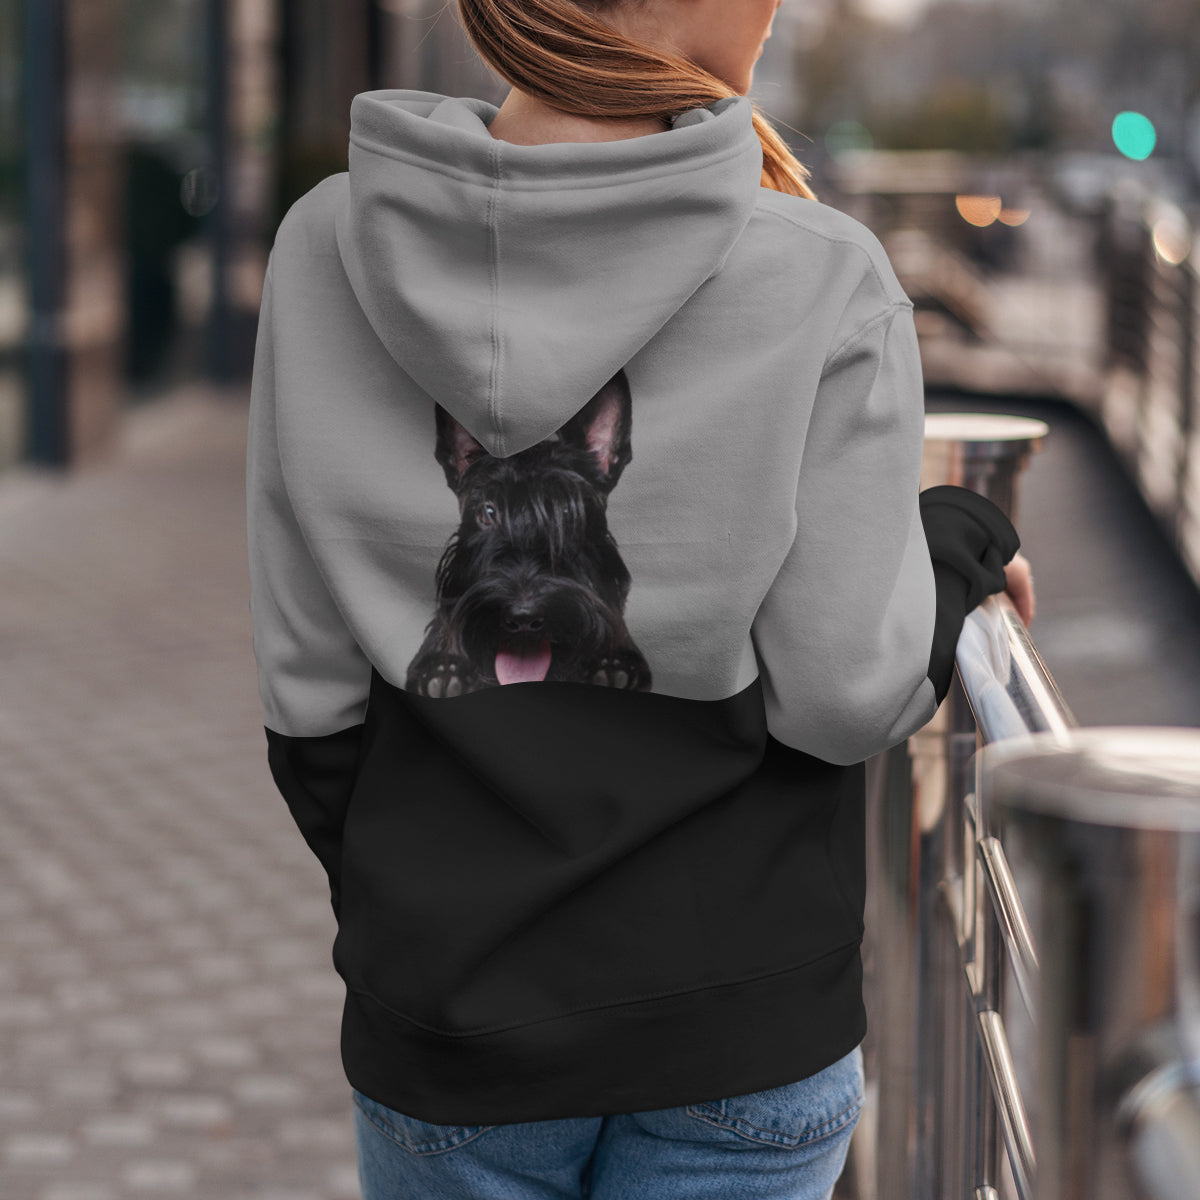 Can You See Me - Scottish Terrier Hoodie V1